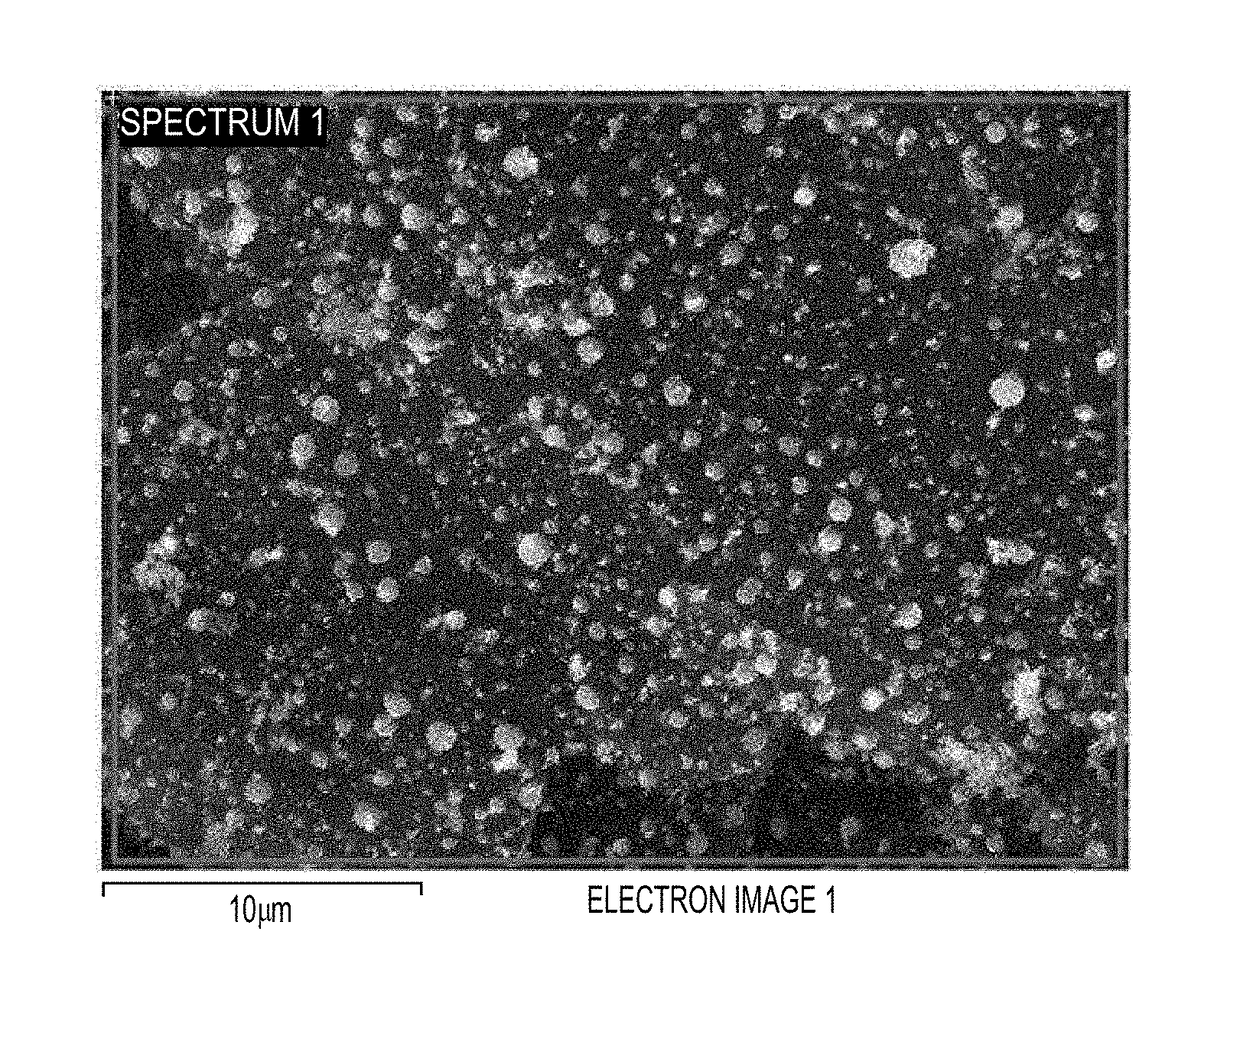 Graphene-nano particle composite having nanoparticles crystallized therein at a high density